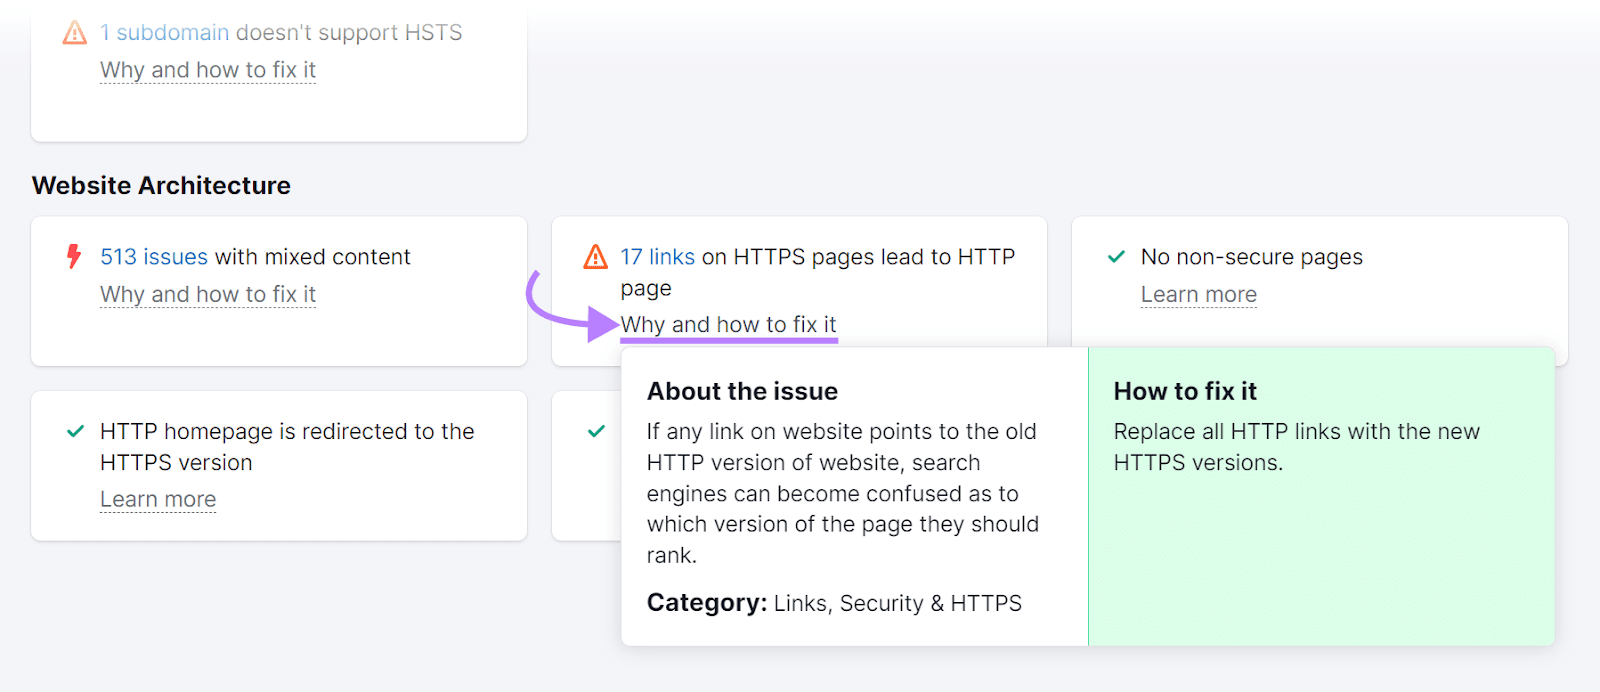 how to hole  an contented   of links connected  HTTPS pages that pb  to HTTP pages